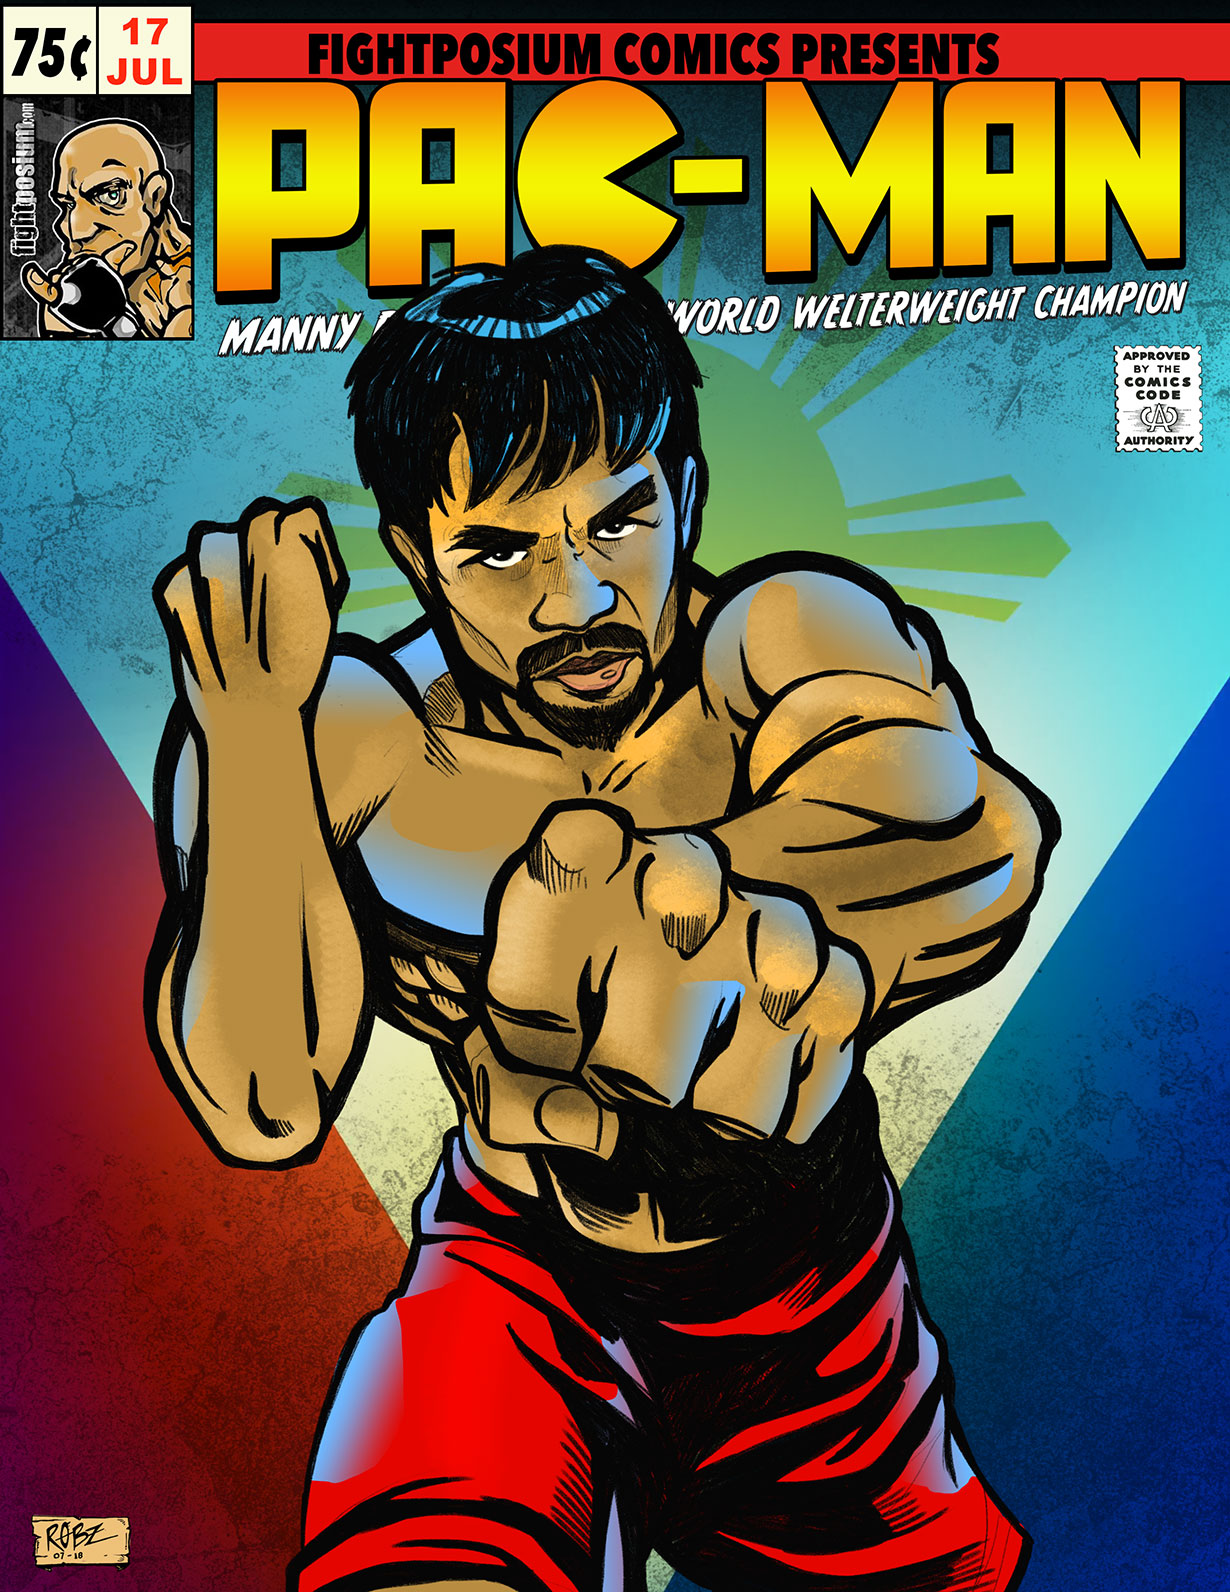 Read more about the article Manny “Pacman” Pacquiao WBA welterweight Champion